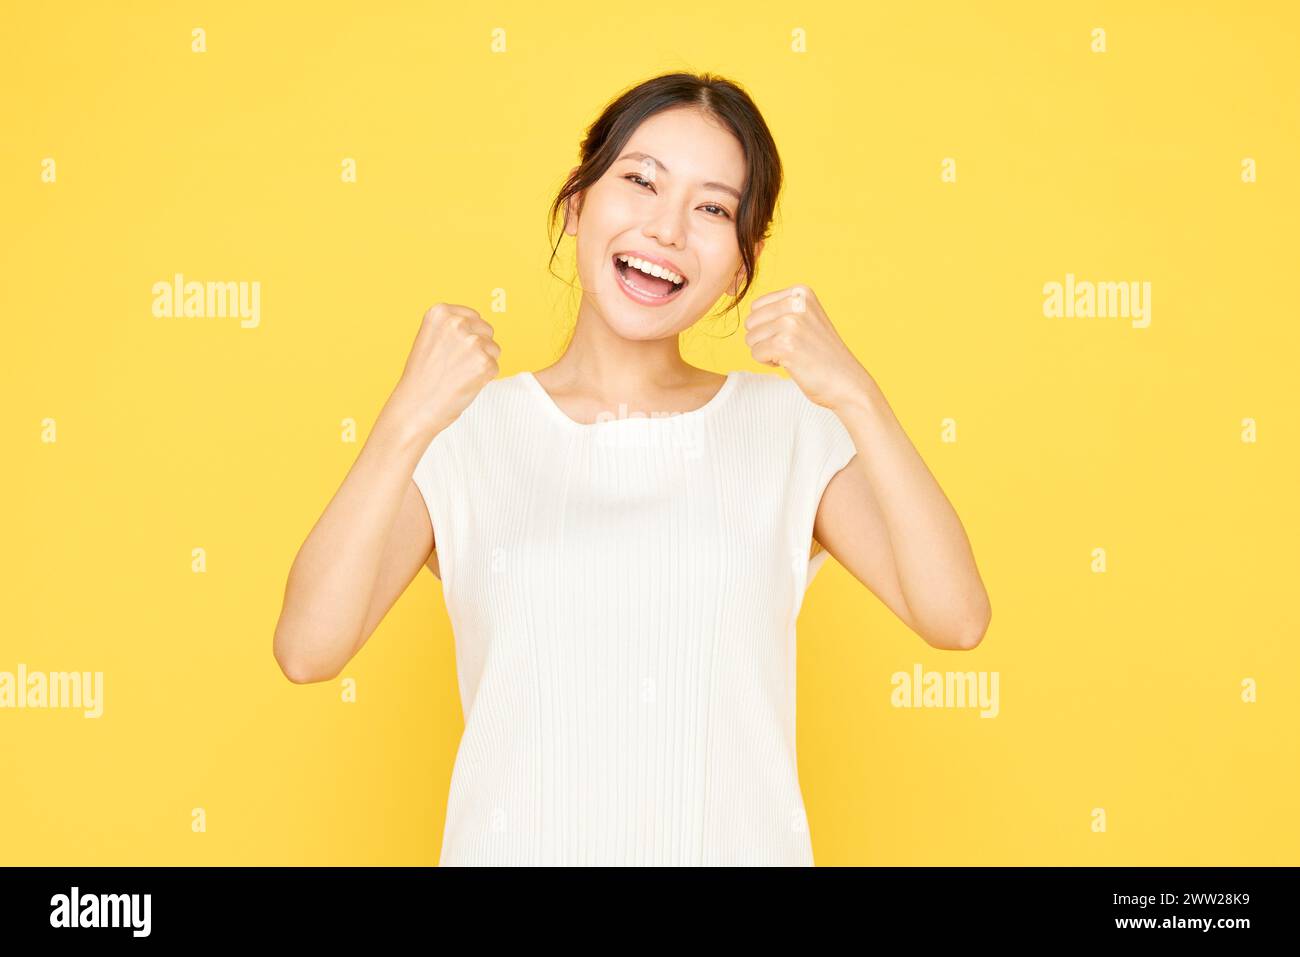 A woman in a white shirt raising her fists Stock Photo